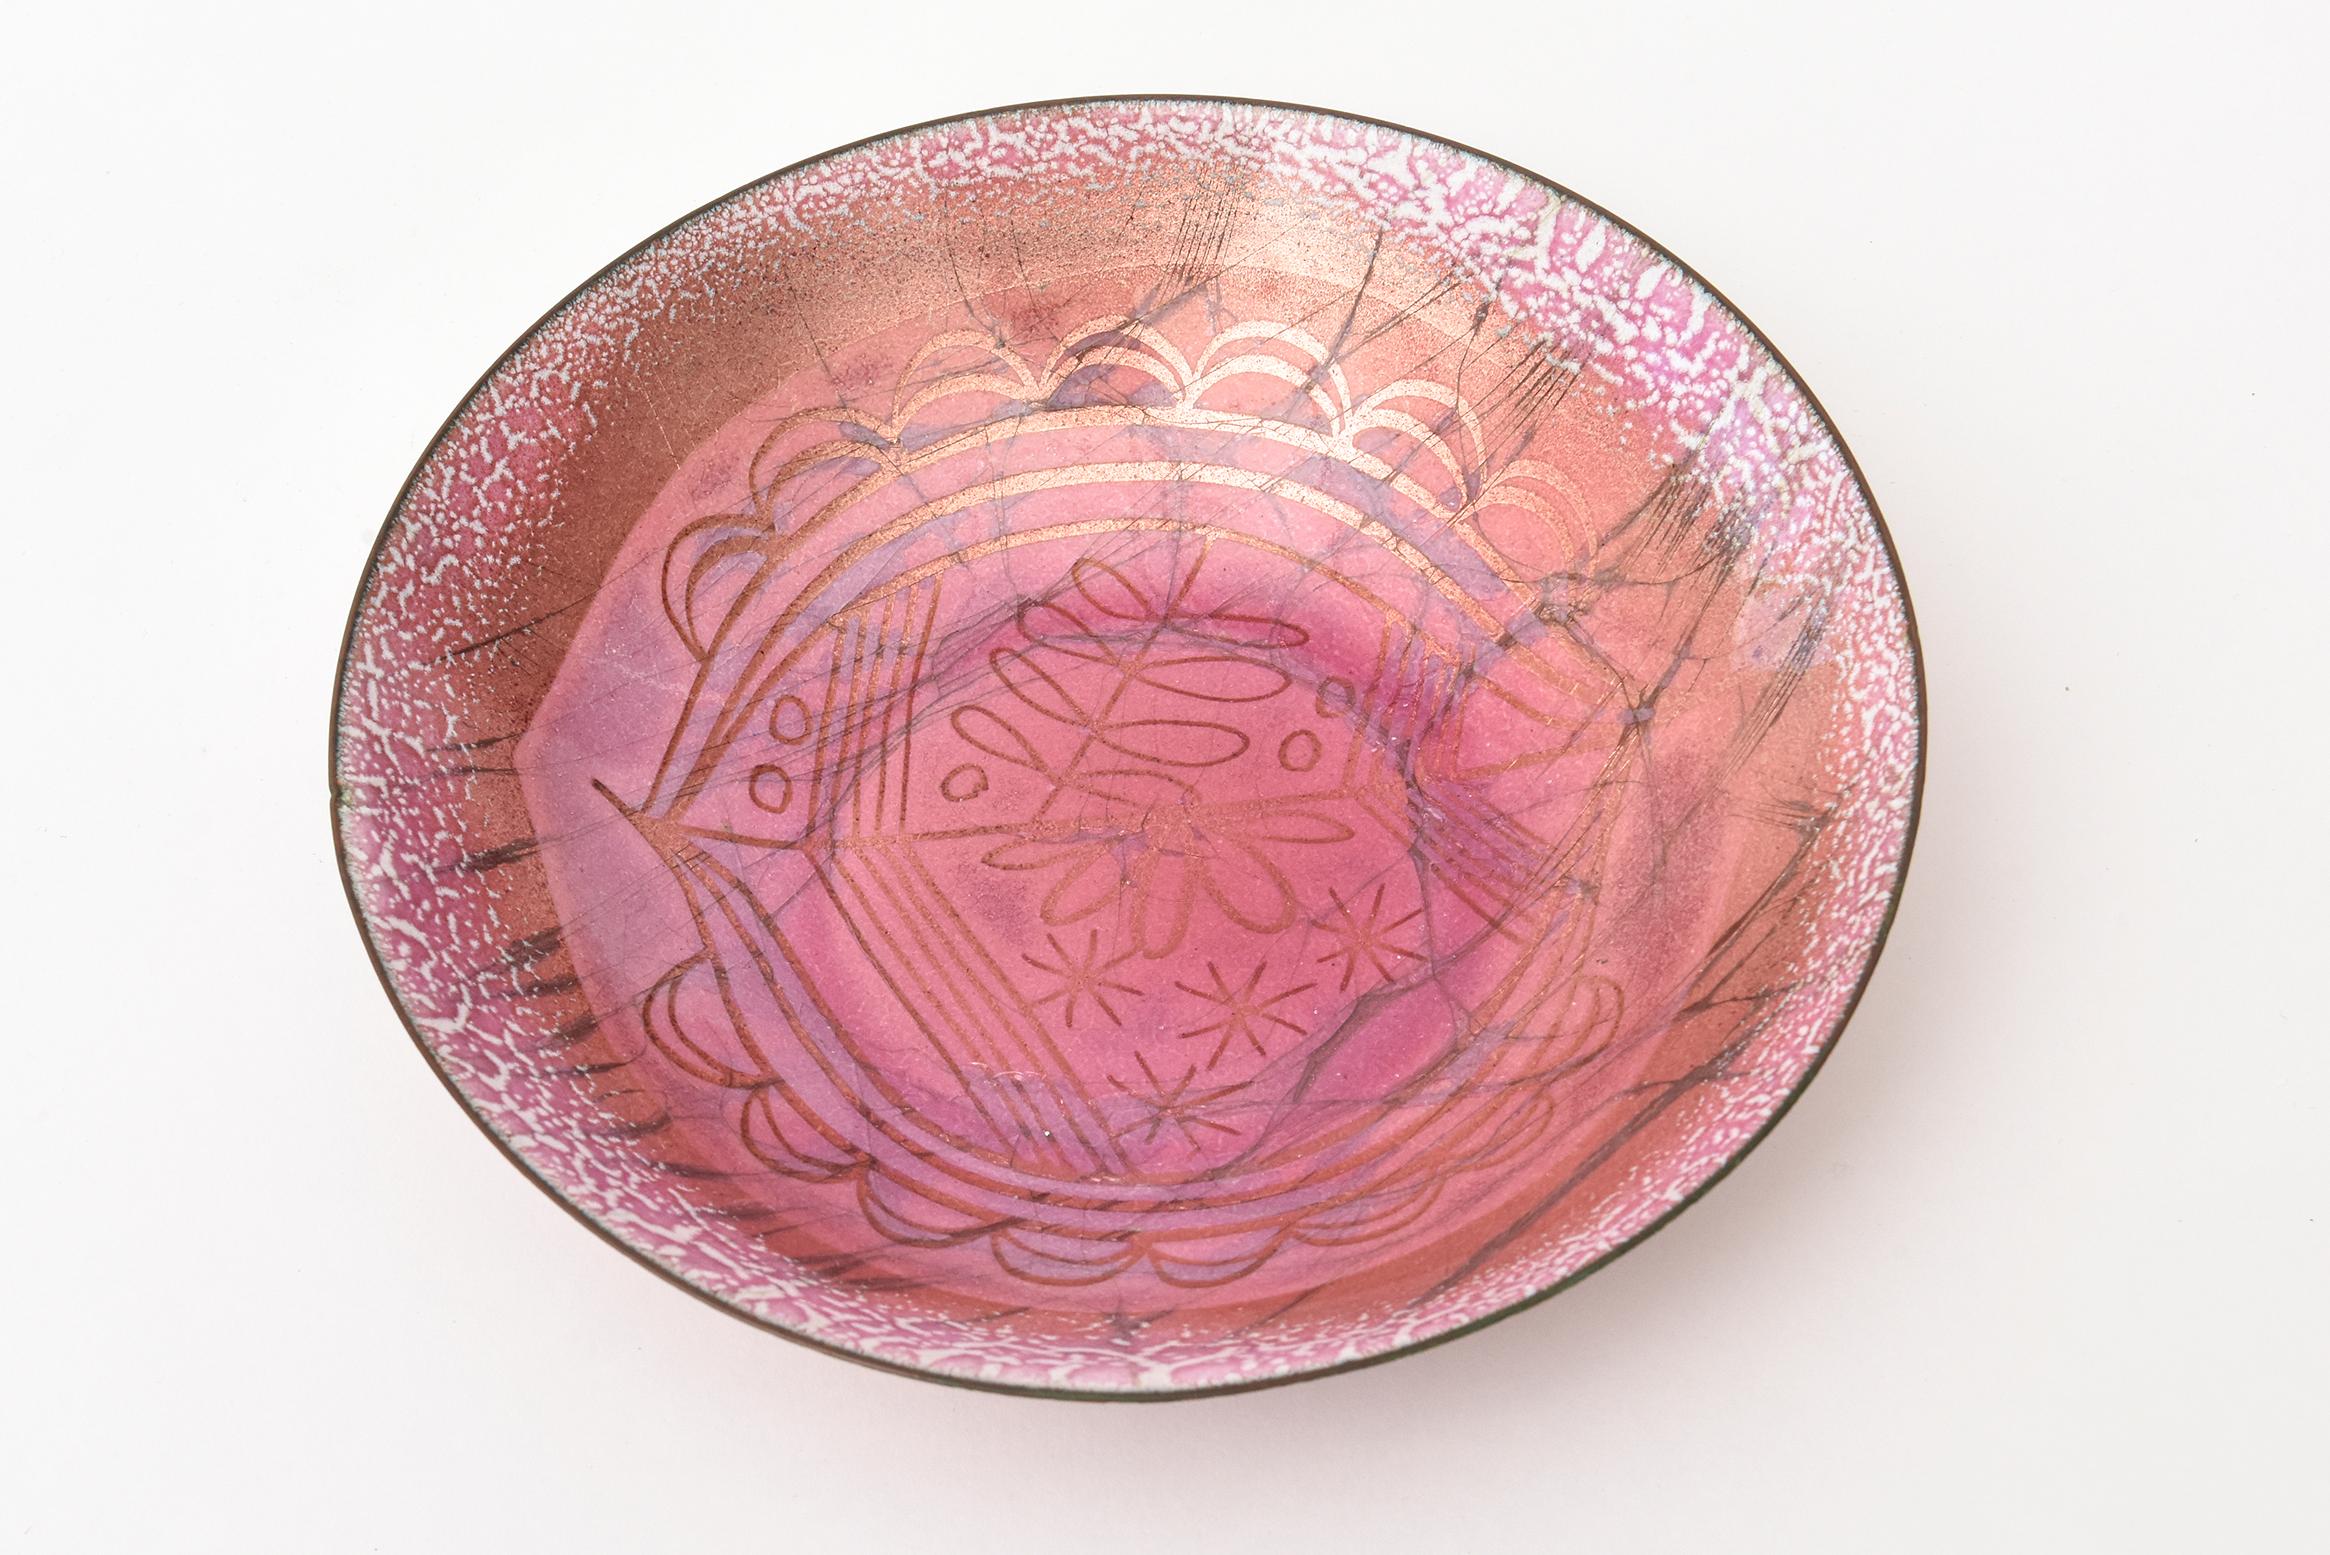 This lovely abstract enamel bowl over copper is signed Winter. It is Mid-Century Modern and the work of Edward Winter. From the 1950s. This is a great object bowl for anywhere with beautiful colors of shades of pink and brown and white. This makes a